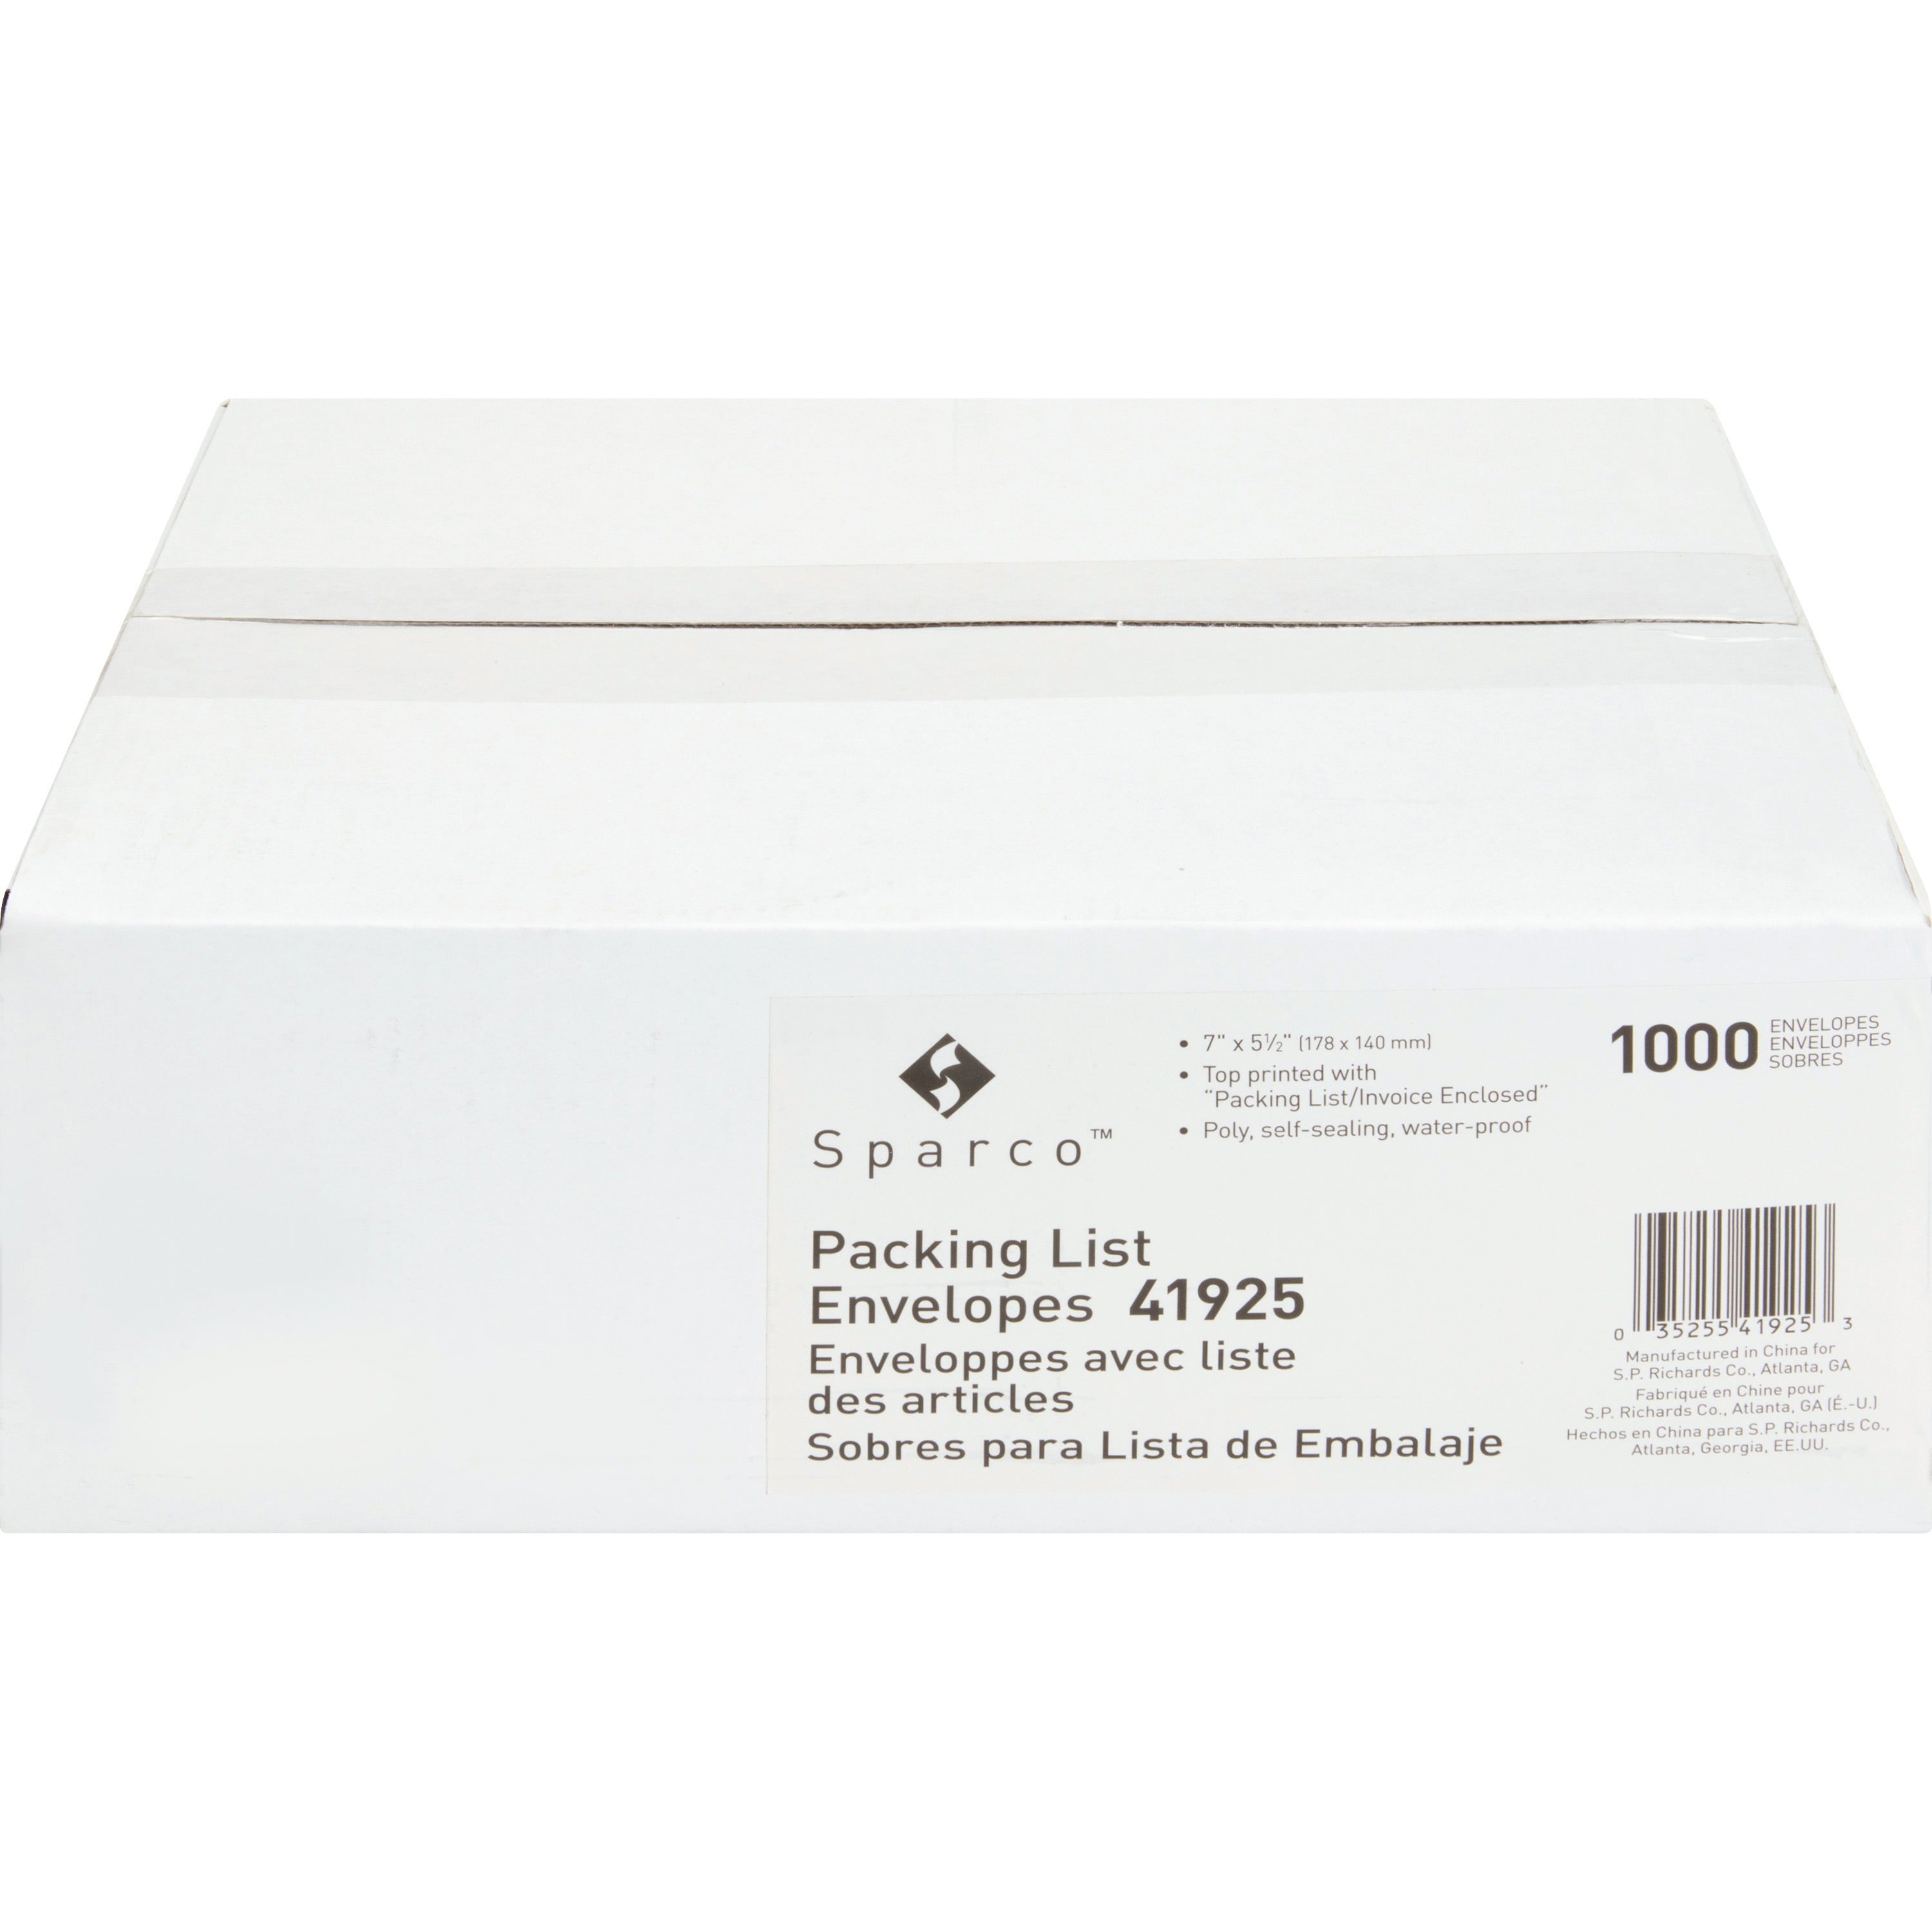 Sparco Pre-labeled Packing Slip Envelope - Packing List - 7" Width x 5 1/2" Length - 70 g/m2 - Self-adhesive Seal - Paper, Low Density Polyethylene (LDPE) - 1000 / Box - White - 